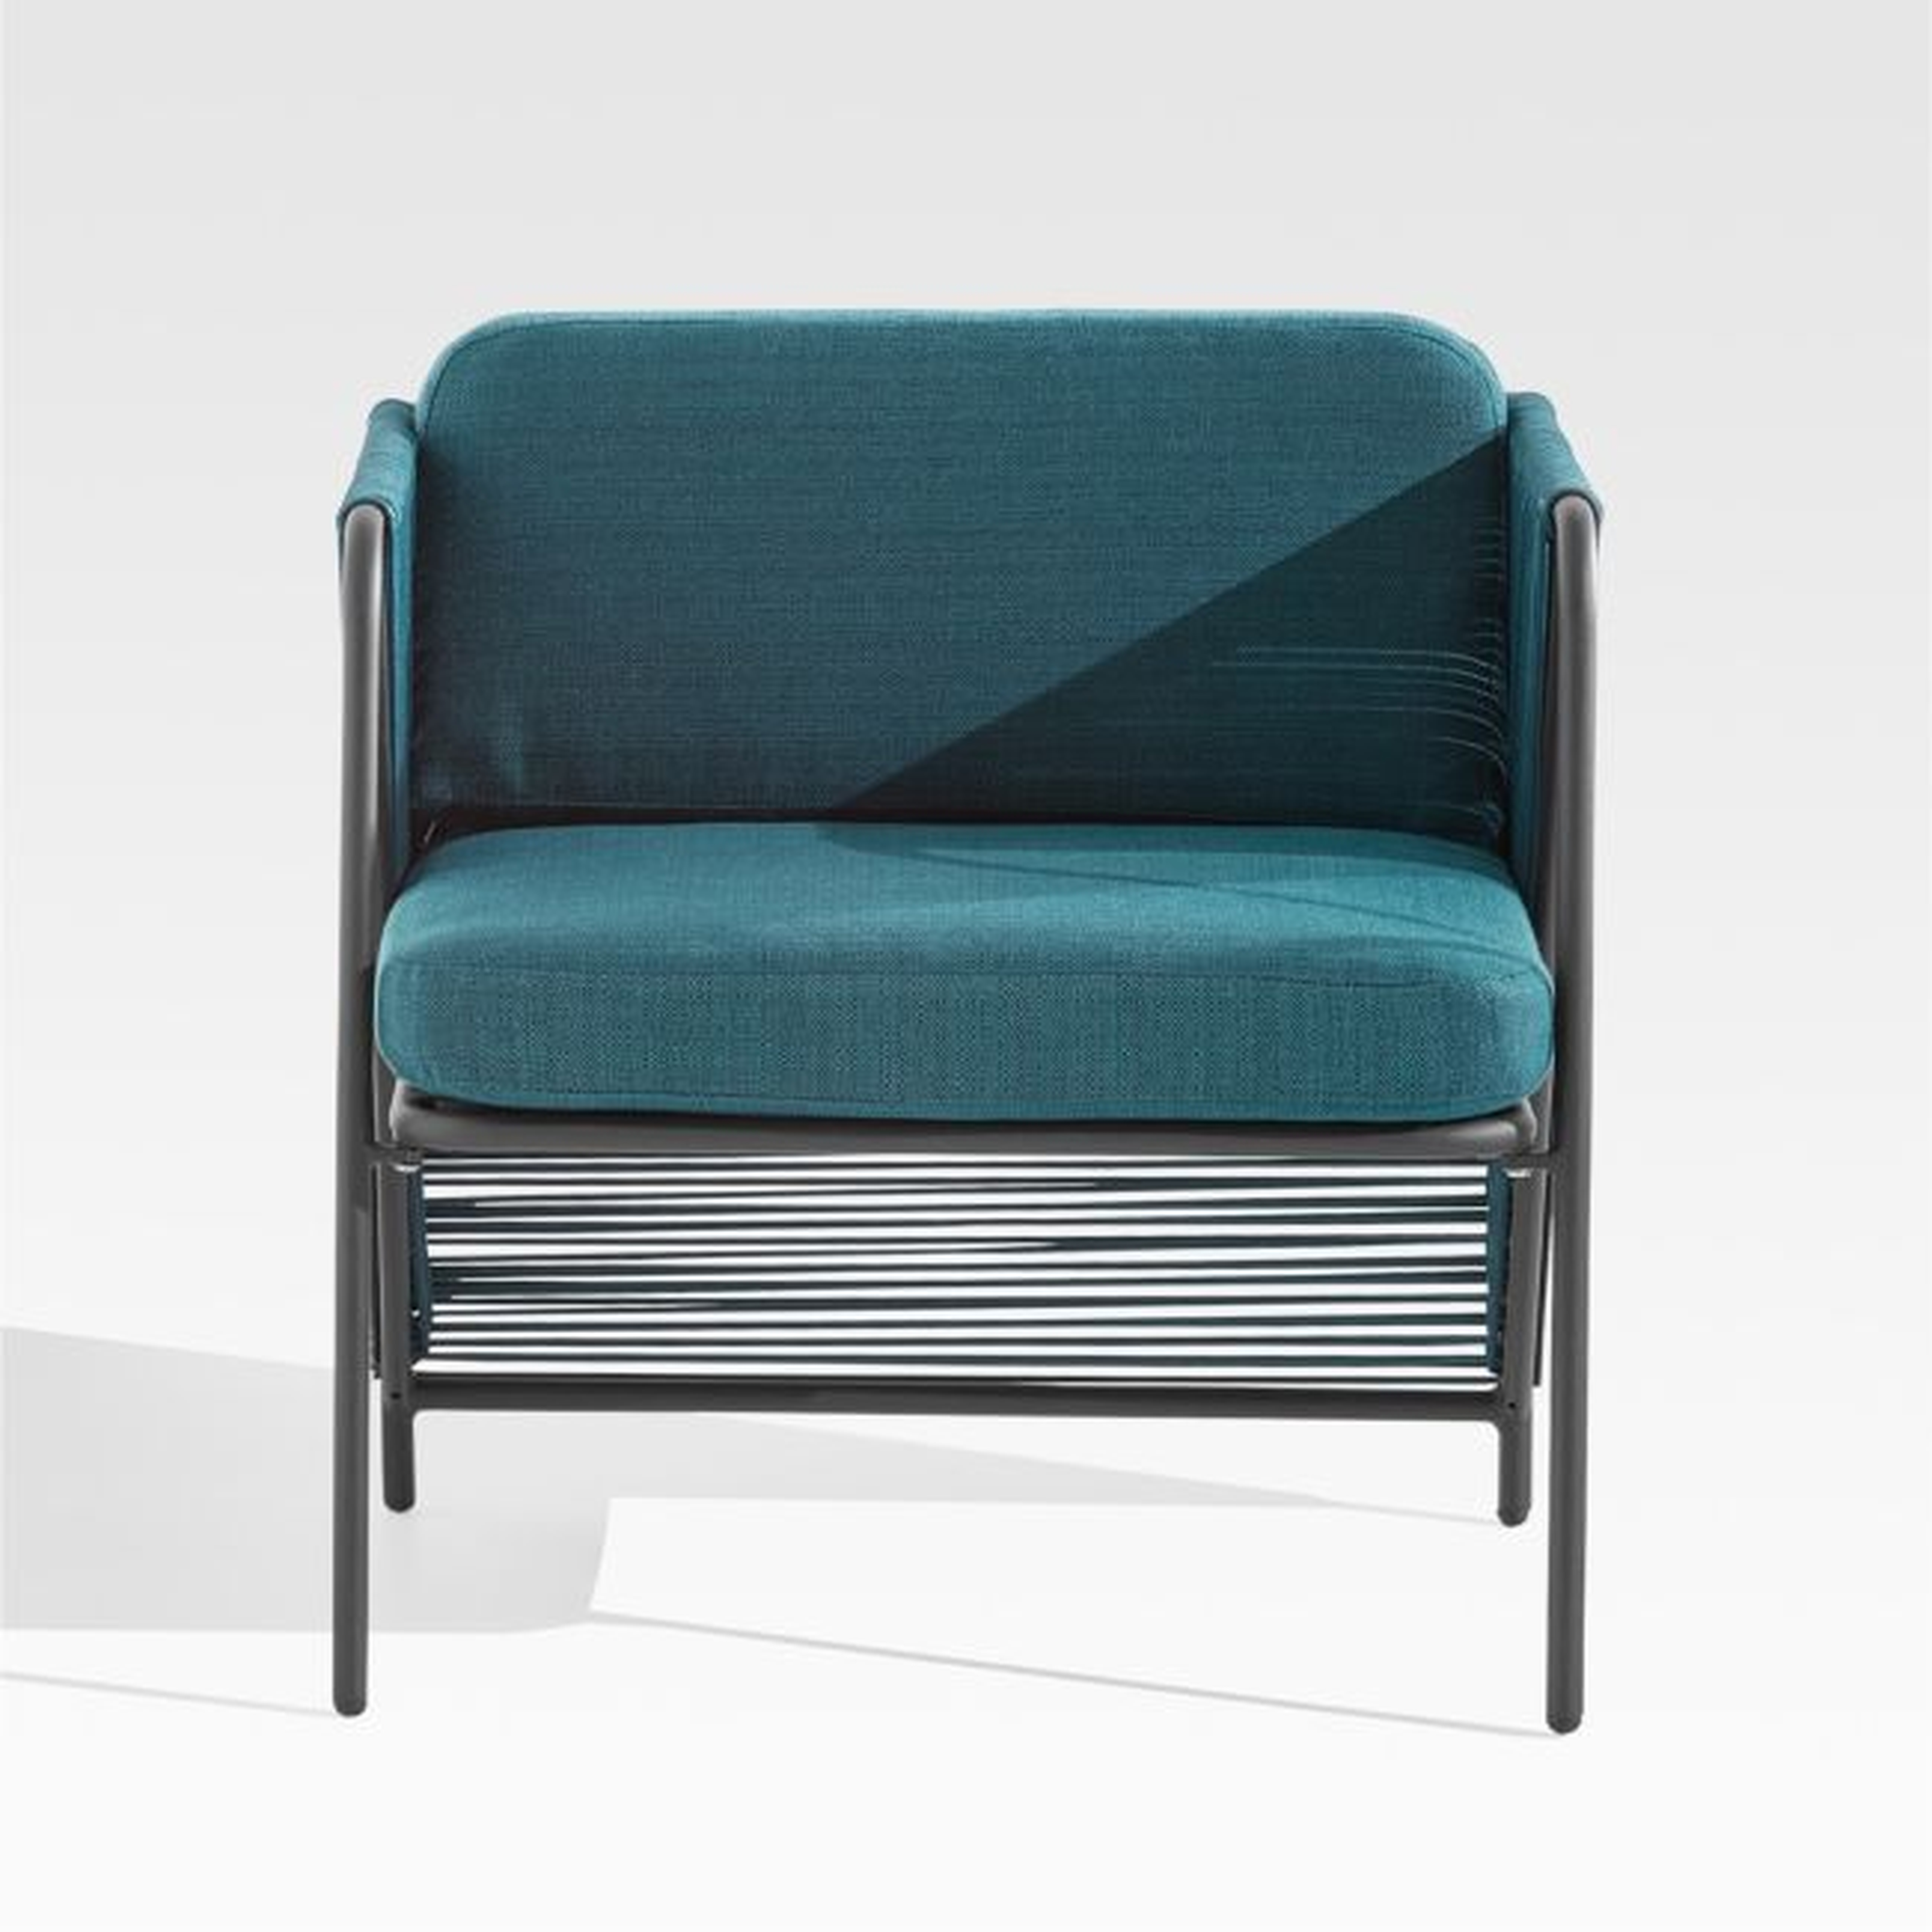 Dorado Teal Small Space Outdoor Lounge Chair - Crate and Barrel